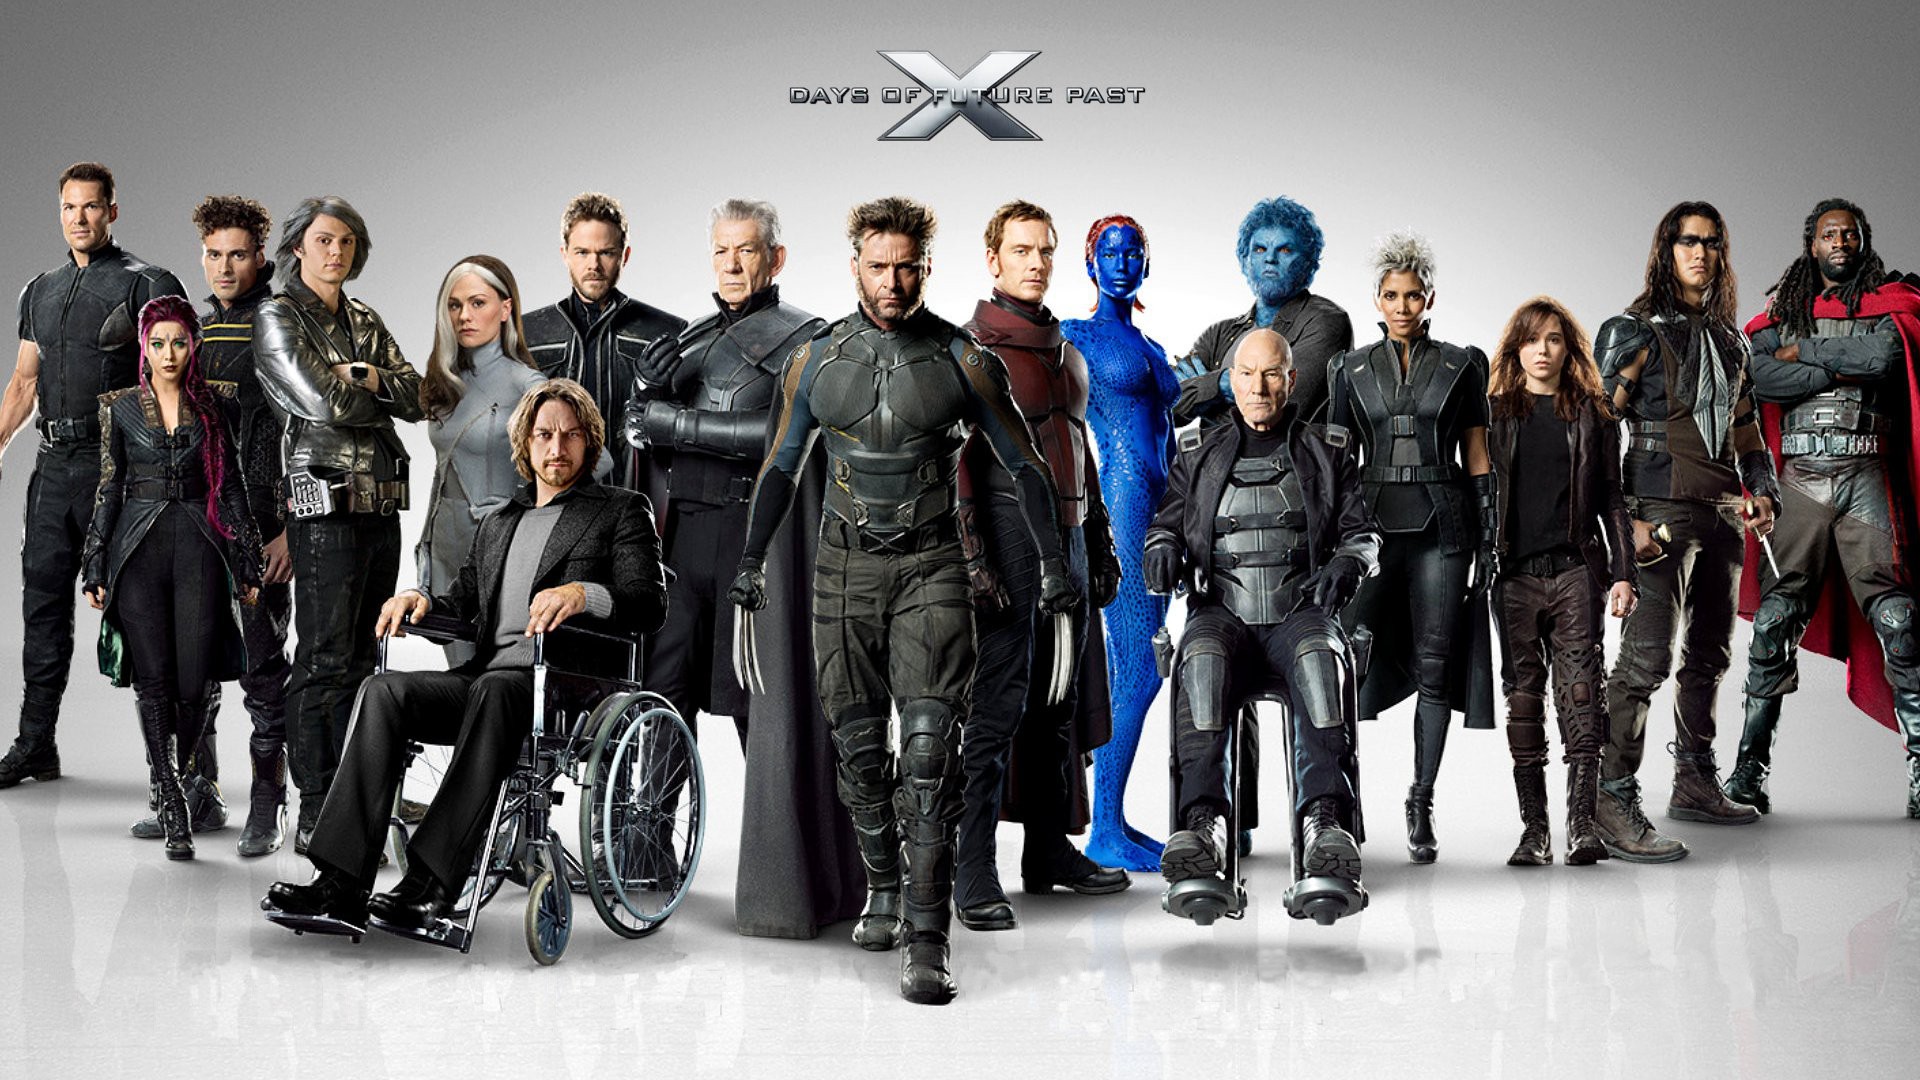 People 1920x1080 X-Men X-Men: Days of Future Past Wolverine Magneto Charles Xavier Beast (character) Ian McKellen science fiction movies Mystique Marvel Comics Rogue (character) Storm (character) Patrick Stewart Michael Fassbender James McAvoy Hugh Jackman Halle Berry Kitty Pryde Elliot Page